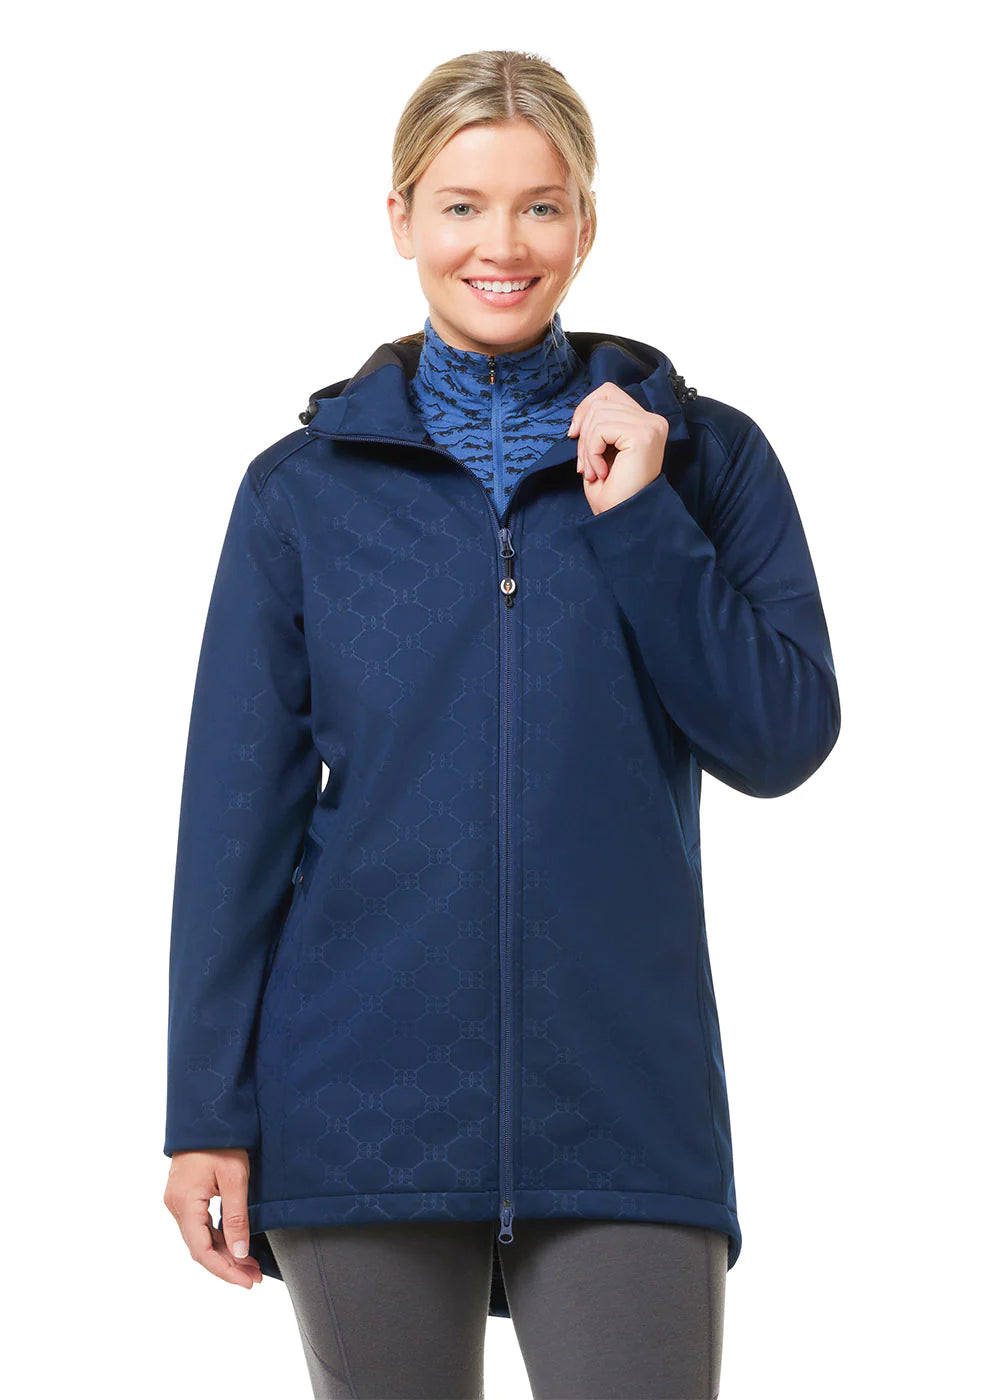 Kerrits Lucky Bits Softshell Riding Jacket - Equine Exchange Tack Shop